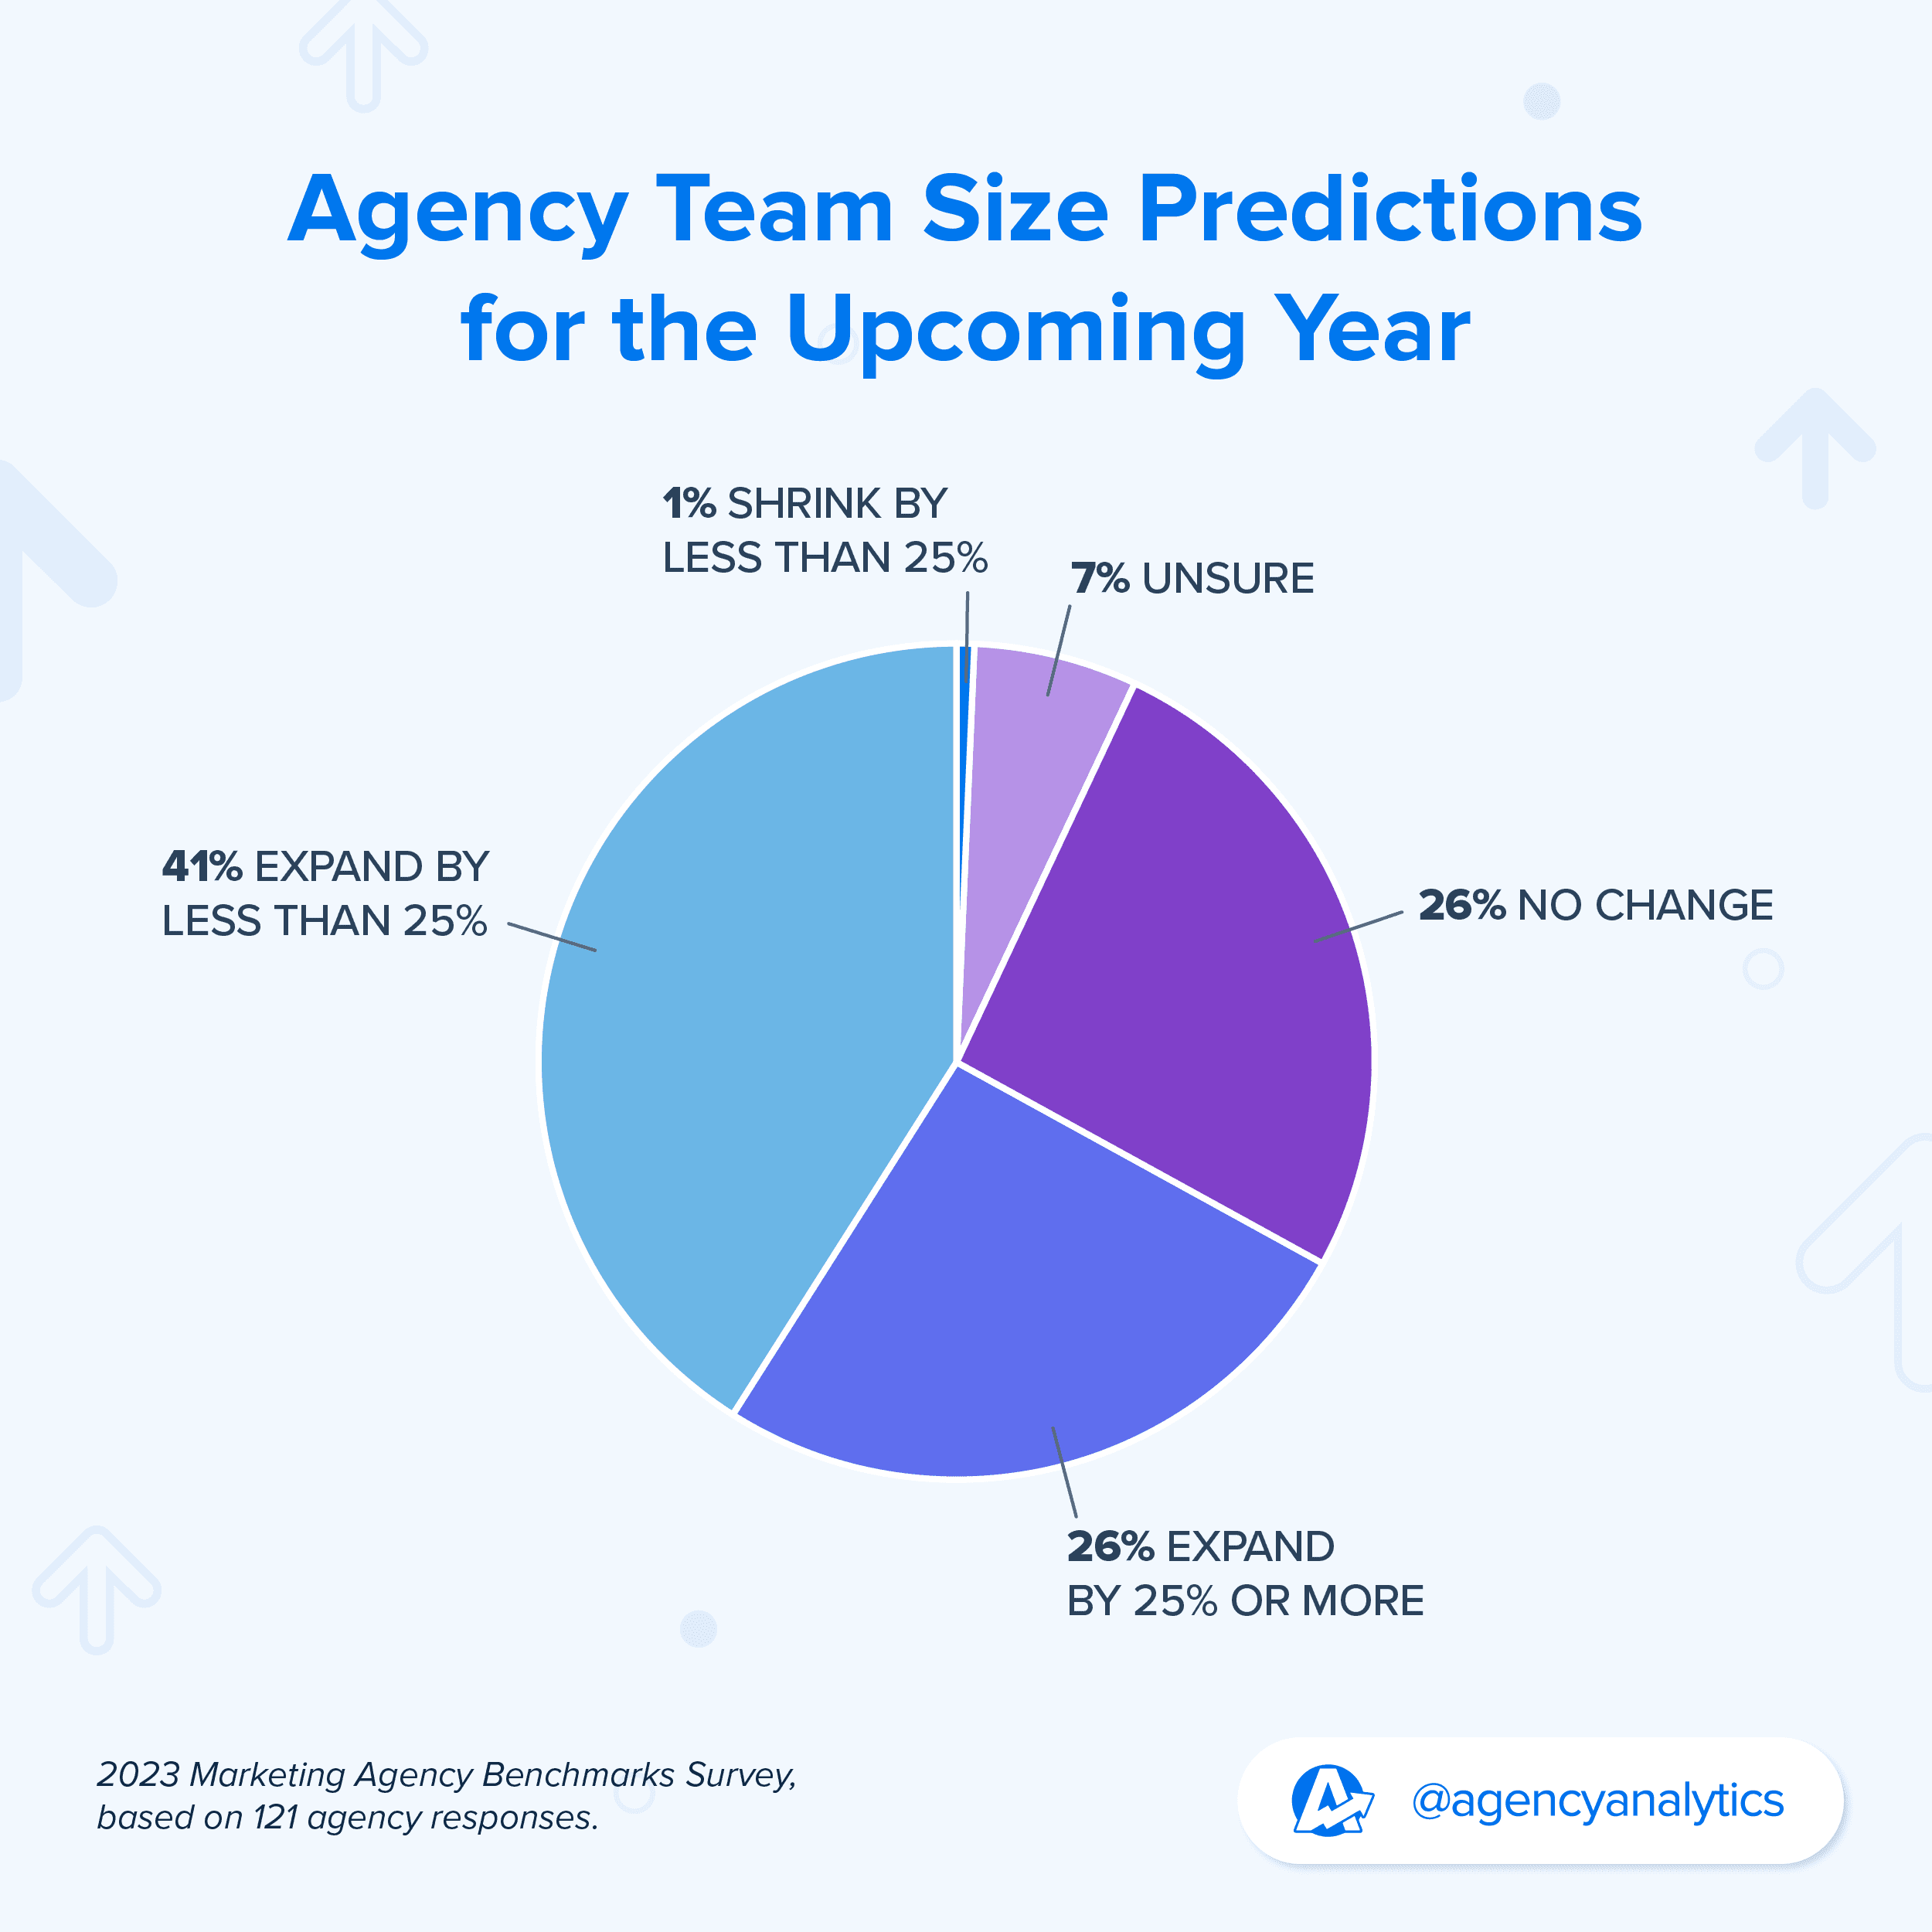 pie chart showing predictions for agency team size in the next year